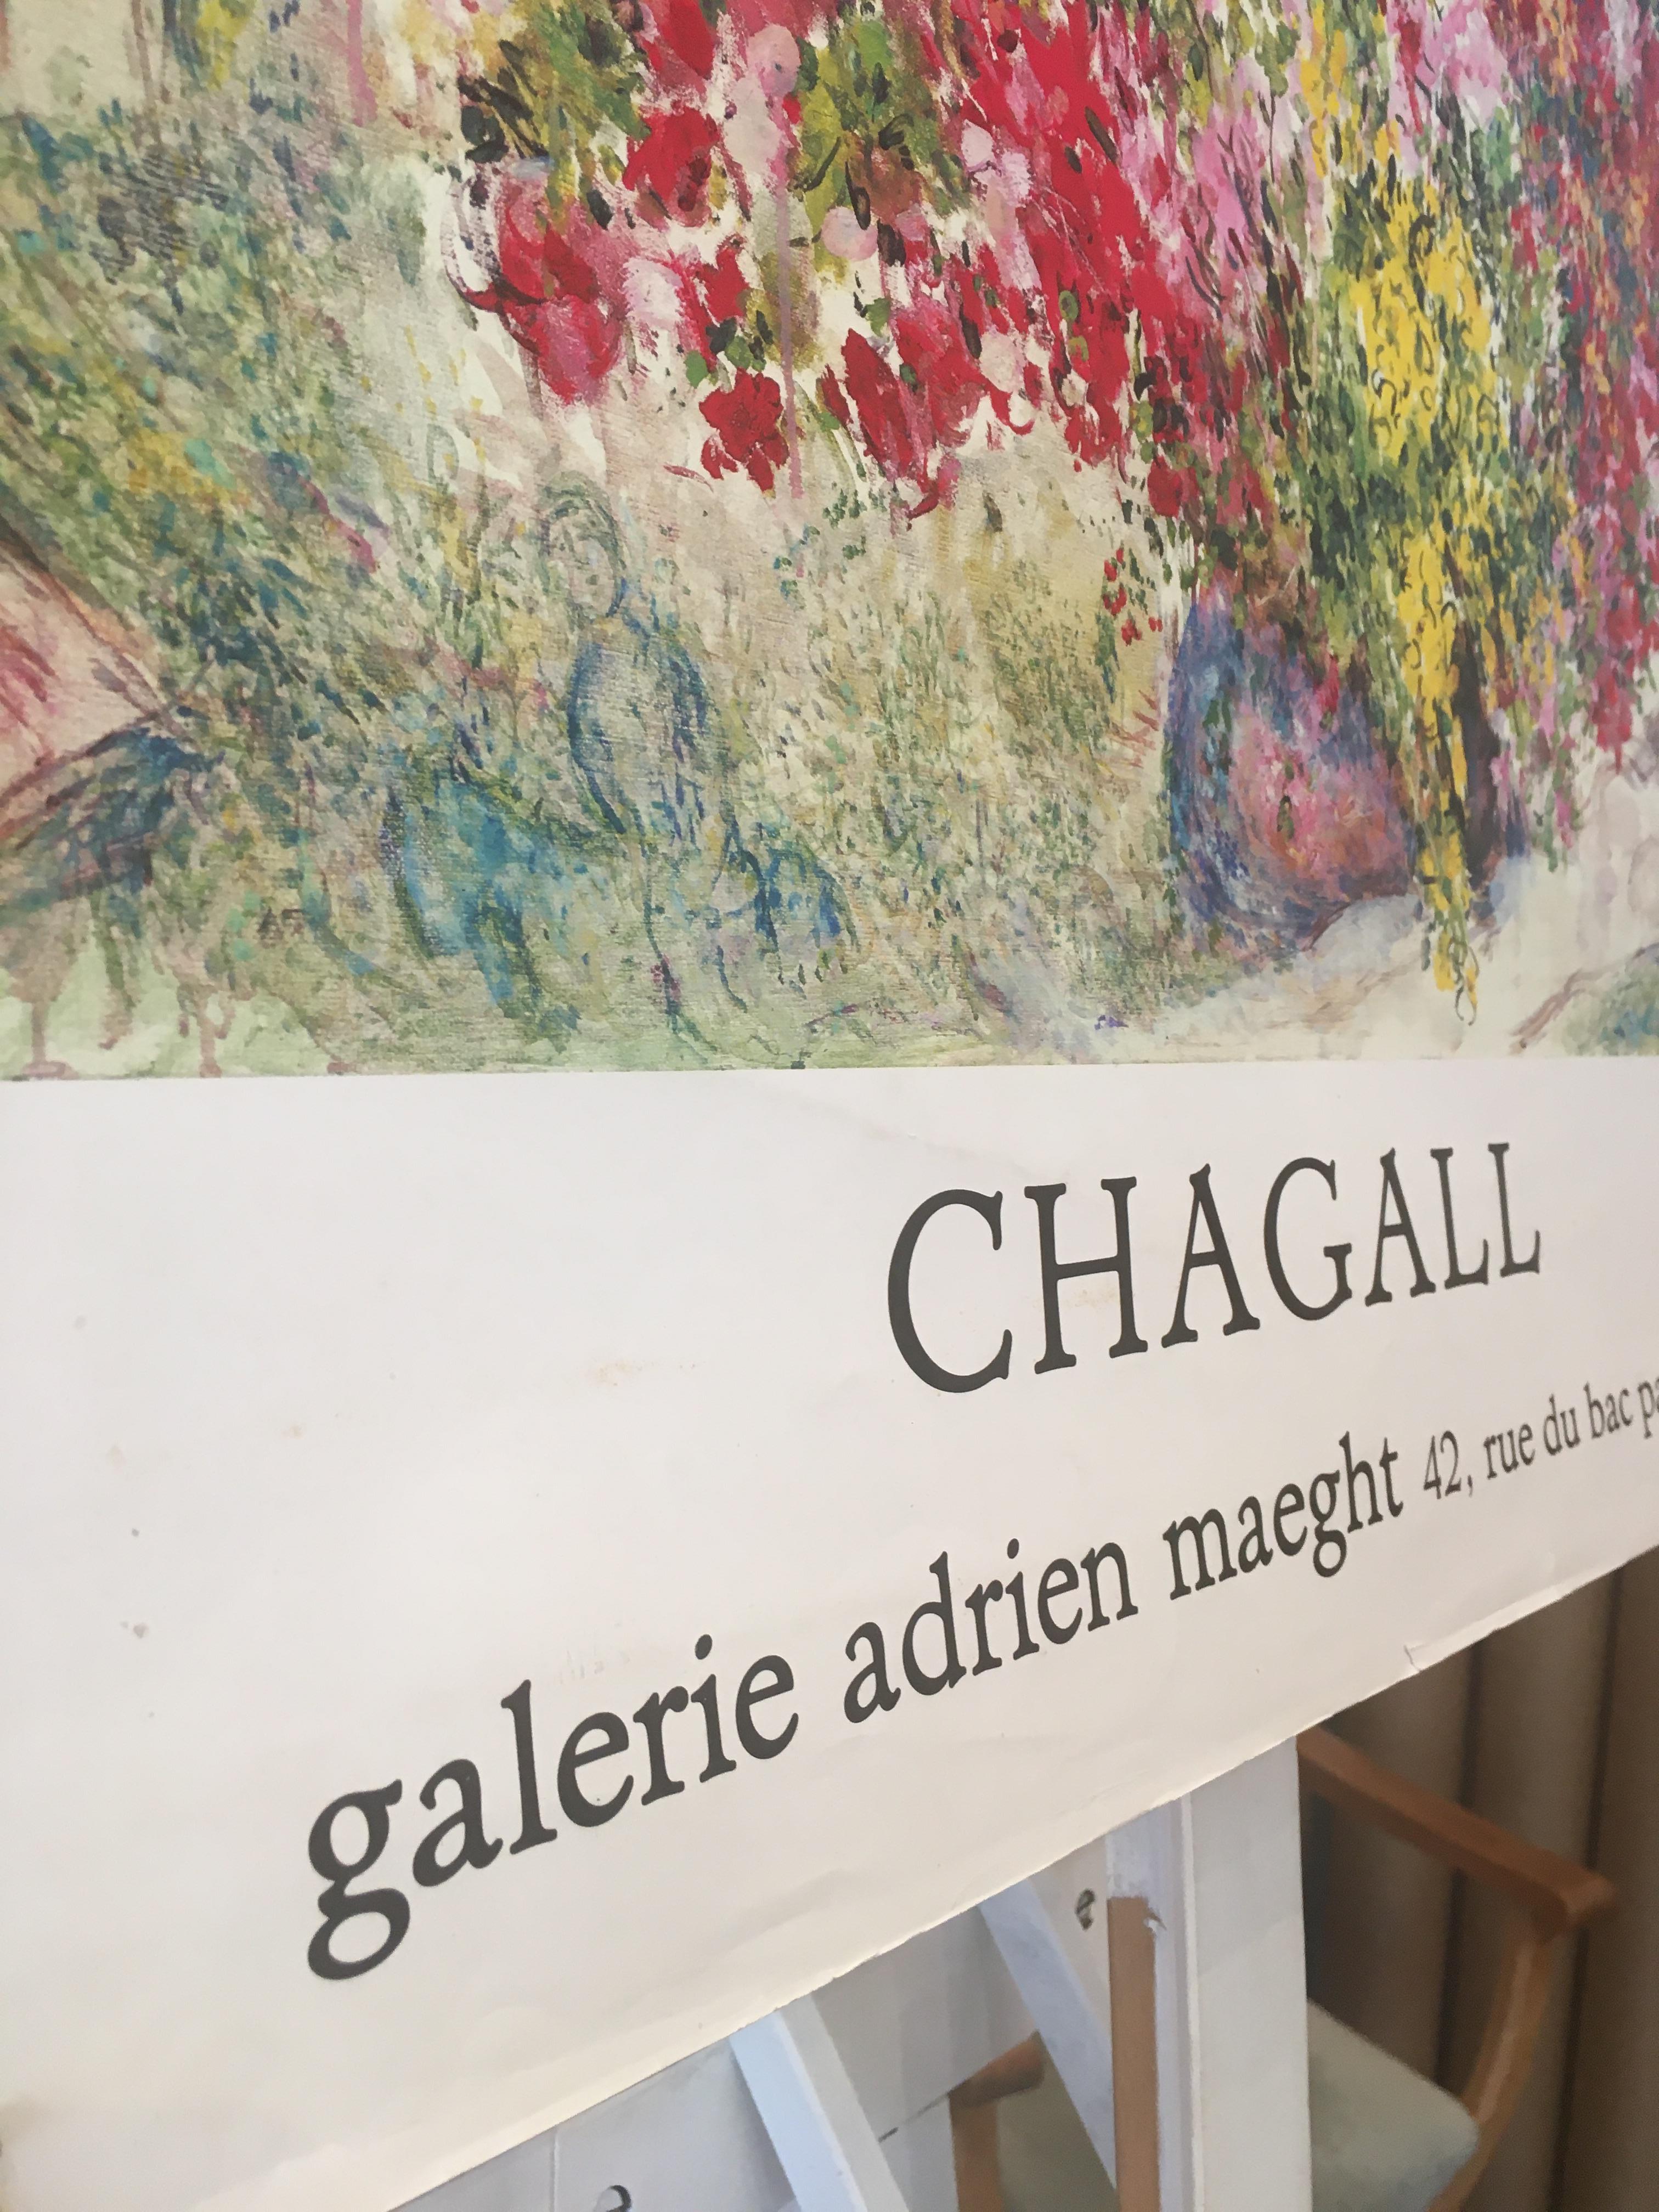 CHAGALL Galerie Adrien Maeght Original Vintage Poster In Good Condition For Sale In Melbourne, Victoria